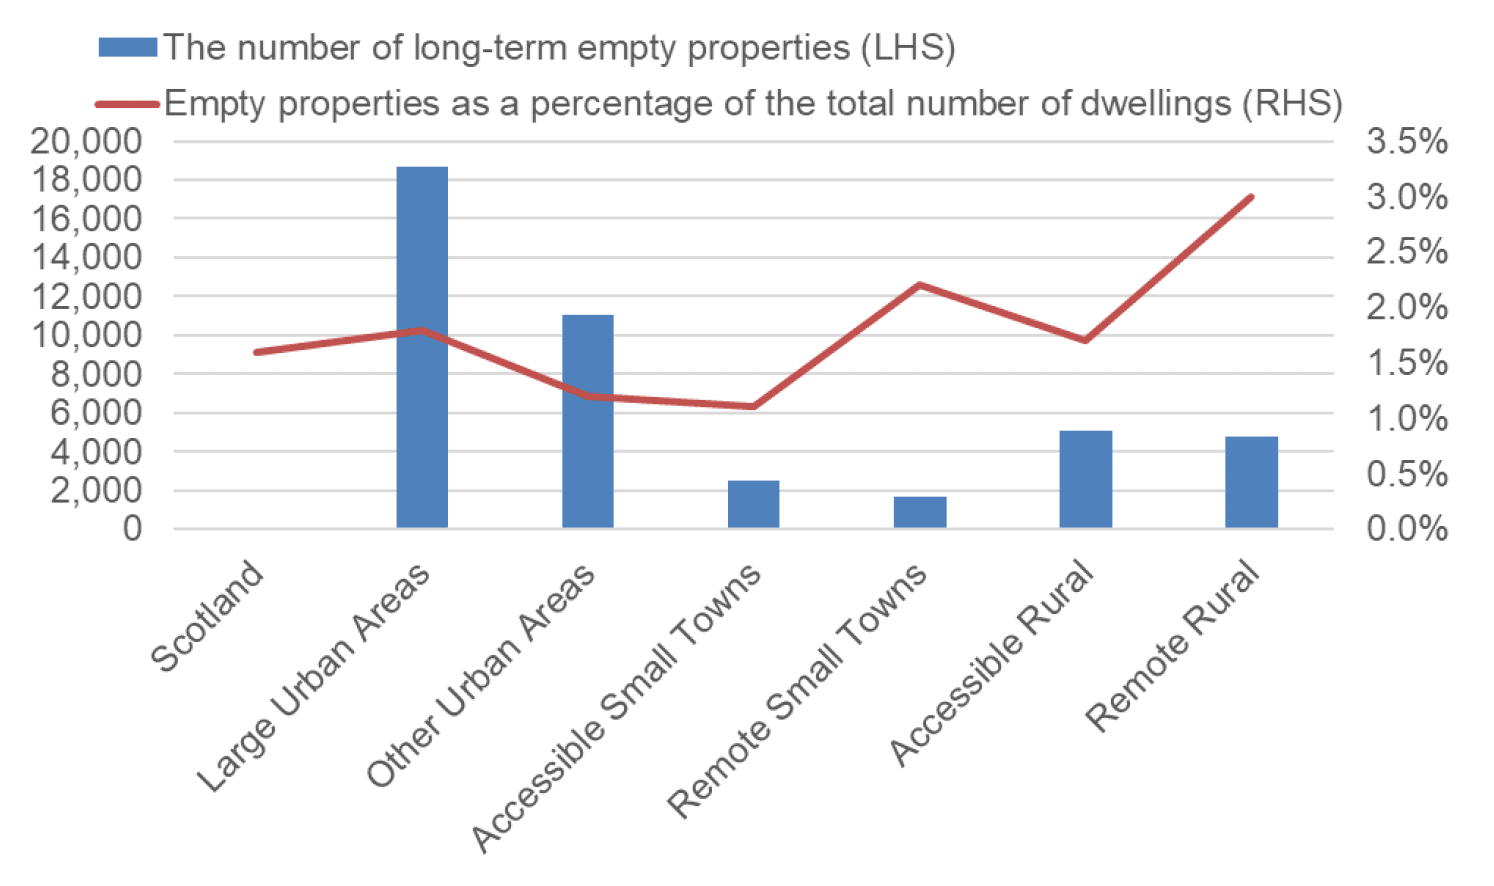 Bar chart outlines the number of long-term empty (6 months or more) homes and the number of long-term empty (6 months or more) homes as a percentage of the total number of dwellings by 6-fold urban rural classification as at September 2021. The 6 categories within the 6-fold urban rural classification are Large Urban Areas, Other Urban Areas, Accessible Small Towns, Remote Small Towns, Accessible Rural Areas and Remote Rural Areas. The number of long-term empty (6 months or more) homes as a percentage of the total number of dwellings for Scotland as a whole is also shown. 